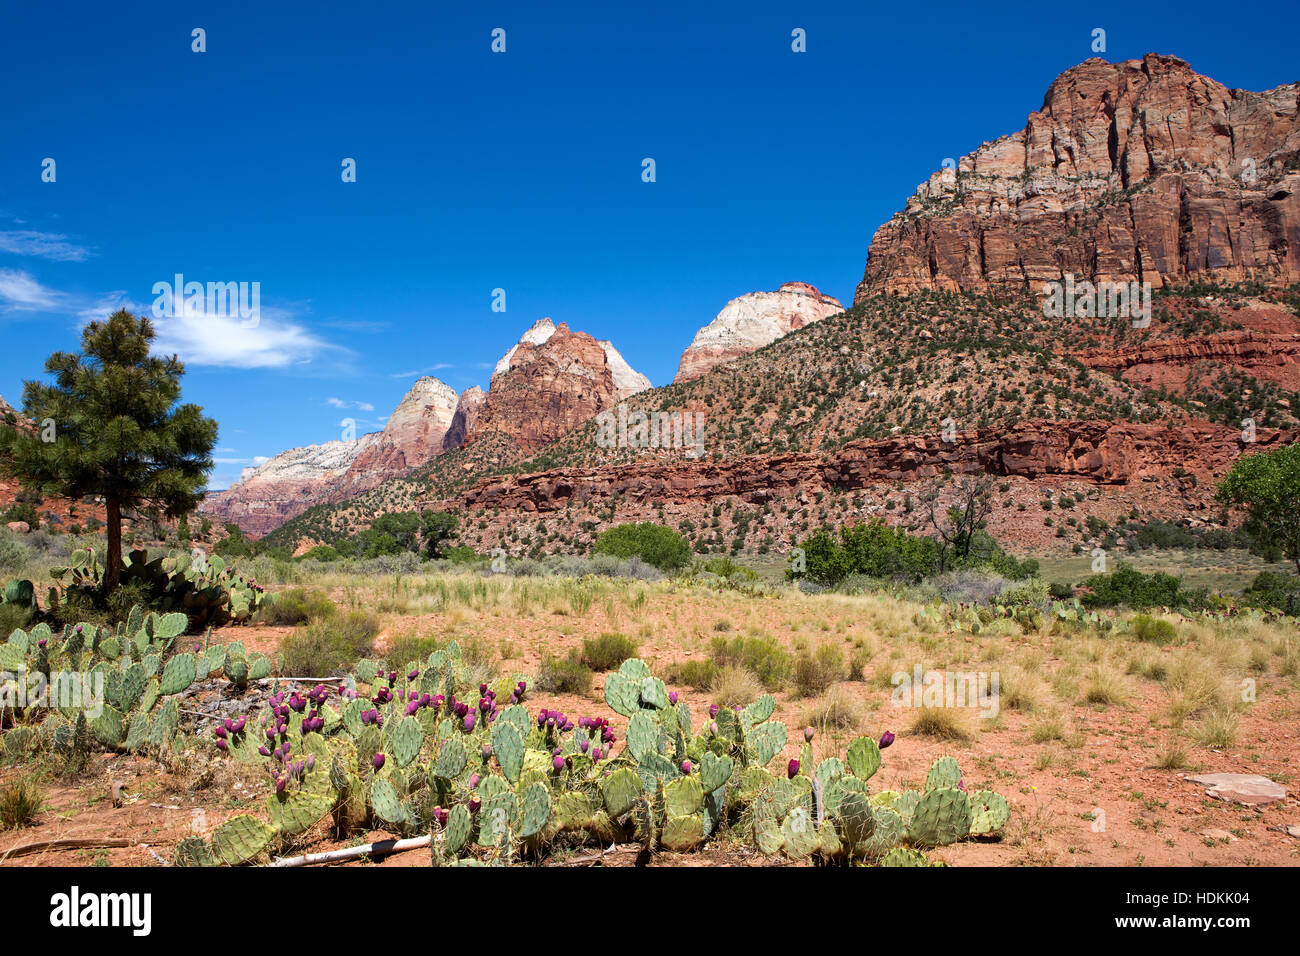 Prickly pear cactus grows in the valley of Zion National Park, Utah, USA. Stock Photo